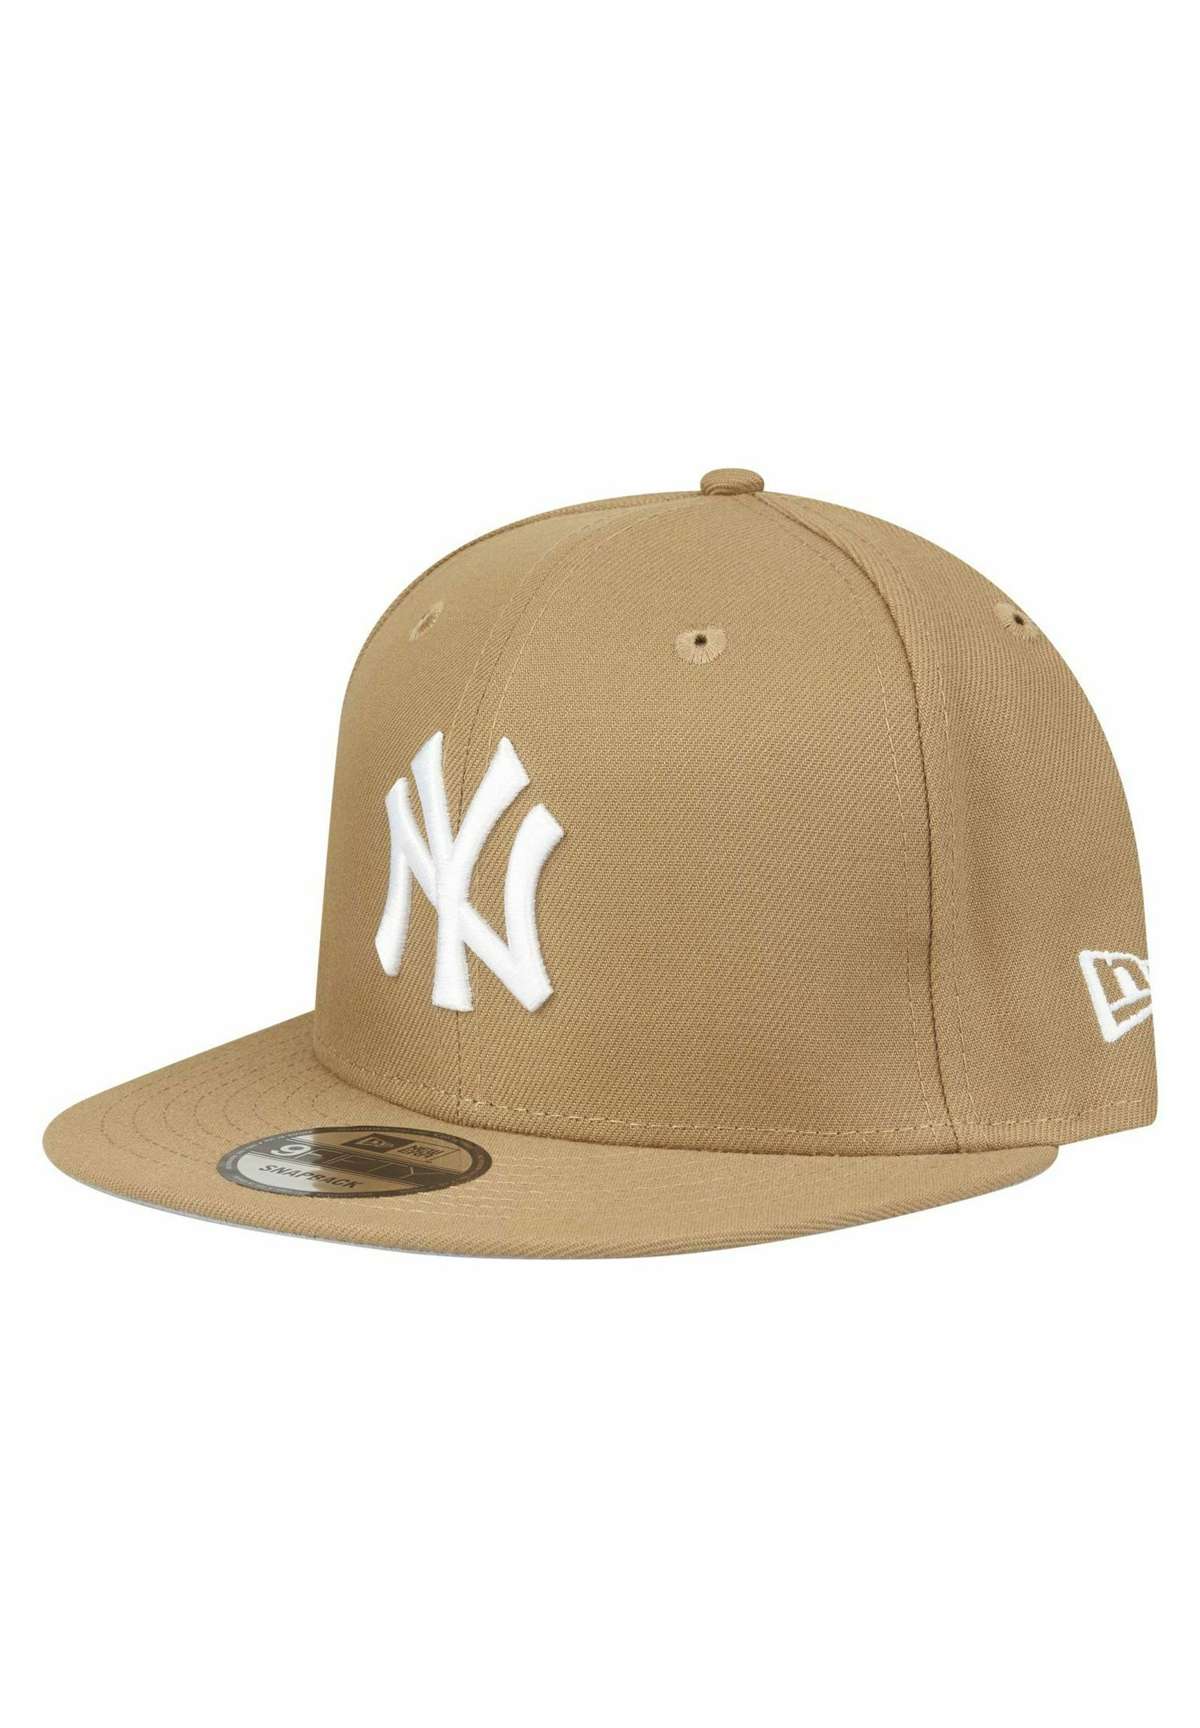 Кепка 9FIFTY NEW YORK YANKEES